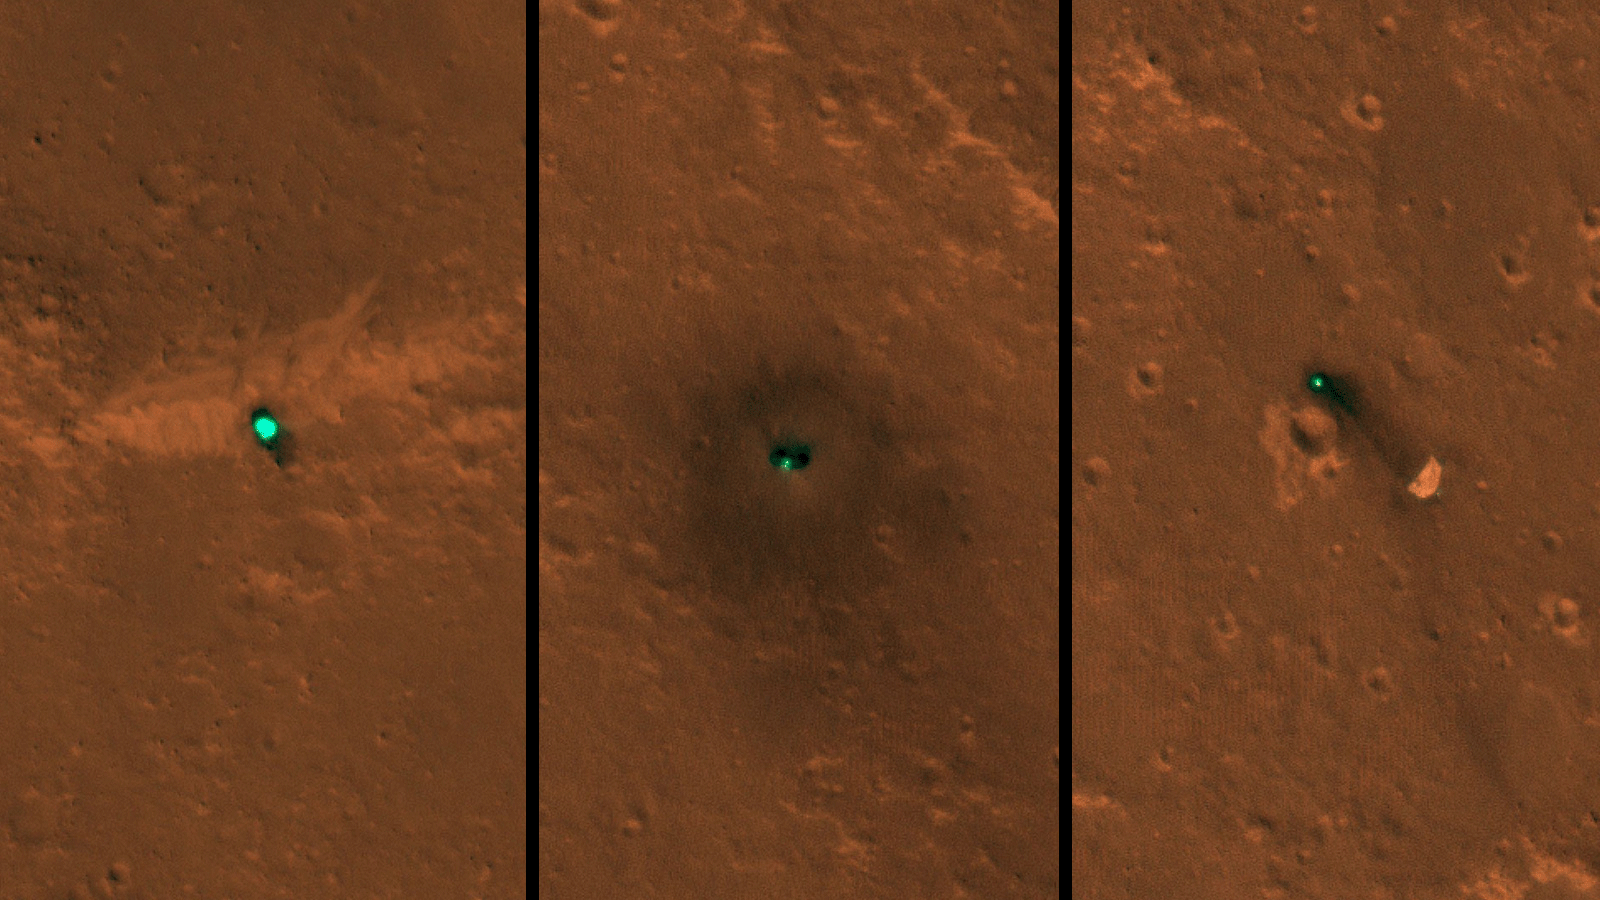 NASA's InSight spacecraft, its head shield and its parachute were imaged on Dec. 6 and 11 by the HiRISE camera onboard NASA's Mars Reconnaissance Orbiter.